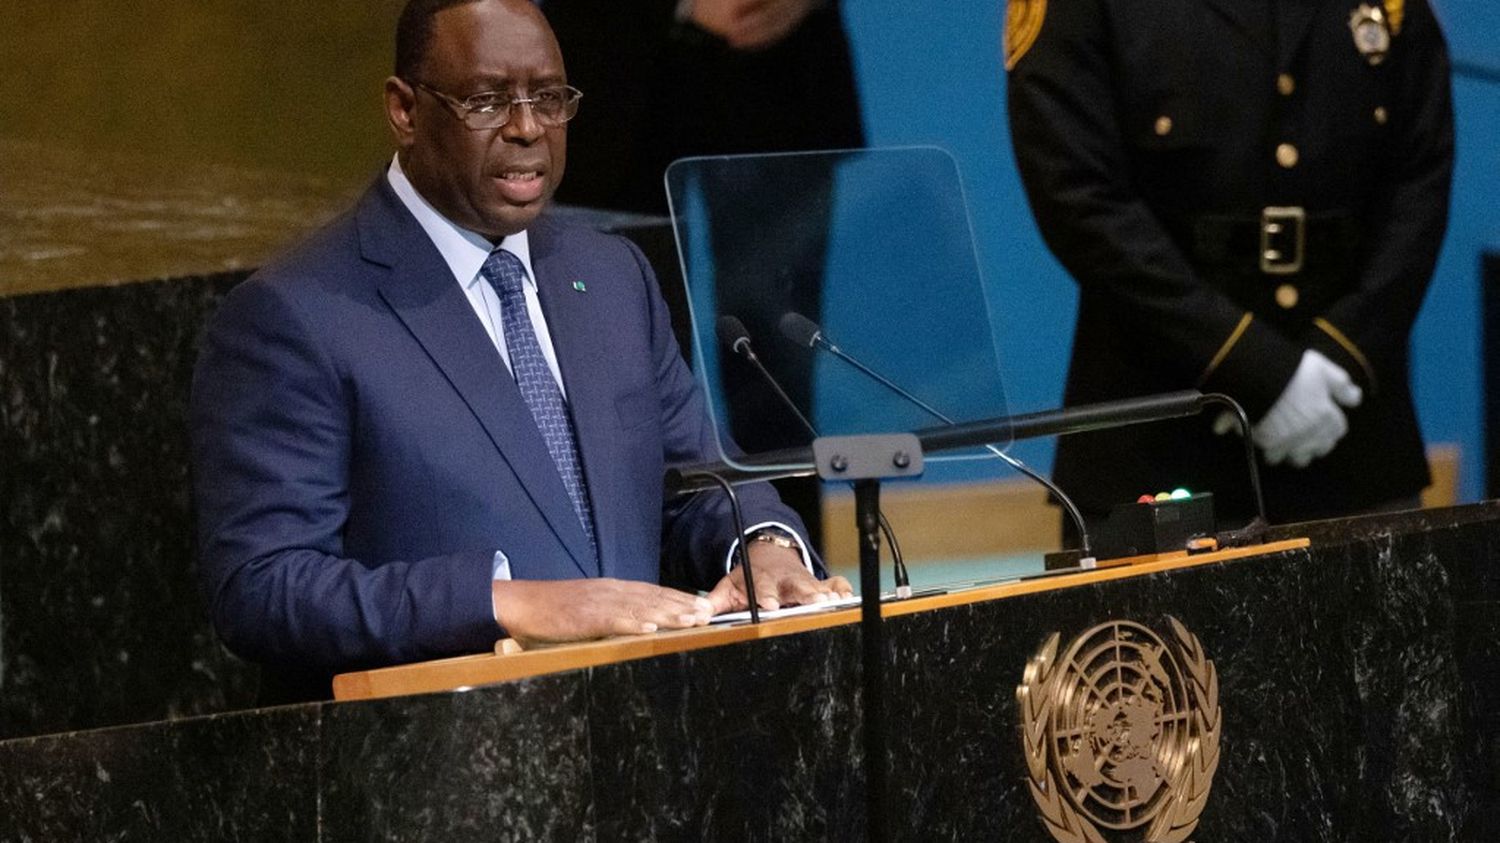 UN: Africa is once again calling for a reform of the Security Council which it considers obsolete
